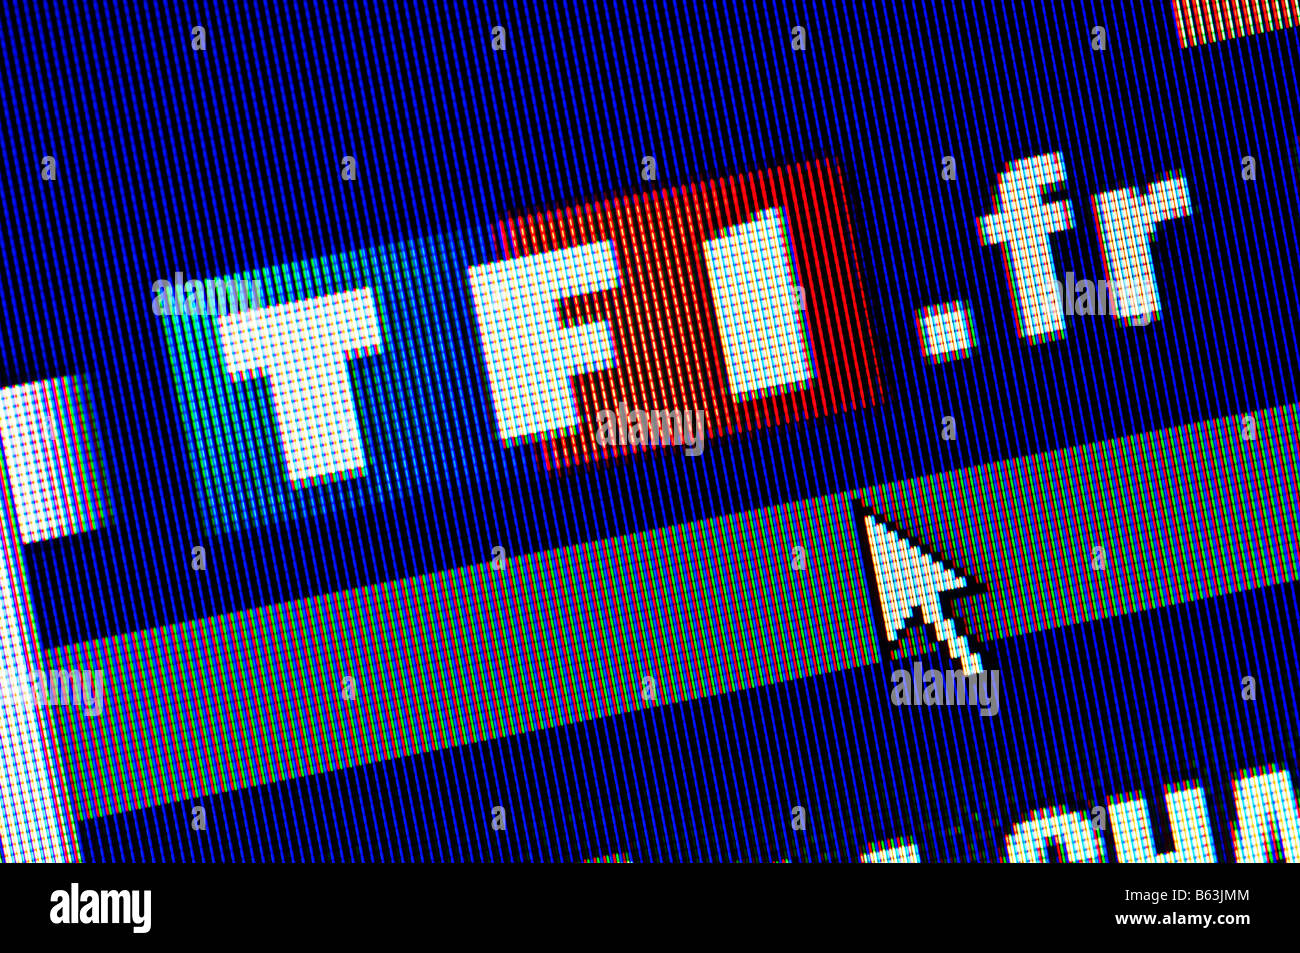 Macro screenshot of TF 1 French tv website Editorial use only Stock Photo